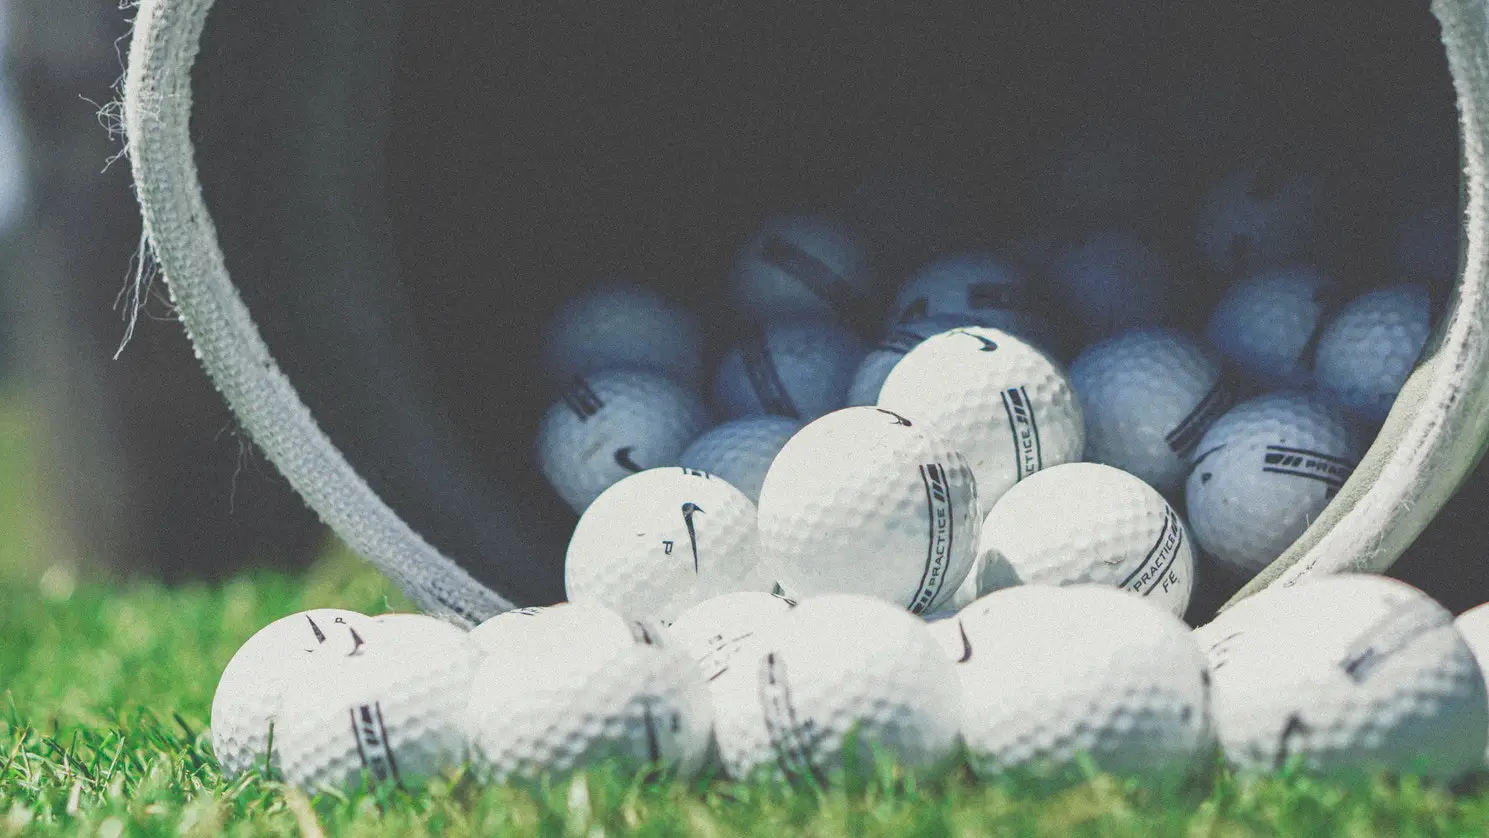 New vs. Used golf balls – Should you pay more for the “best balls”?